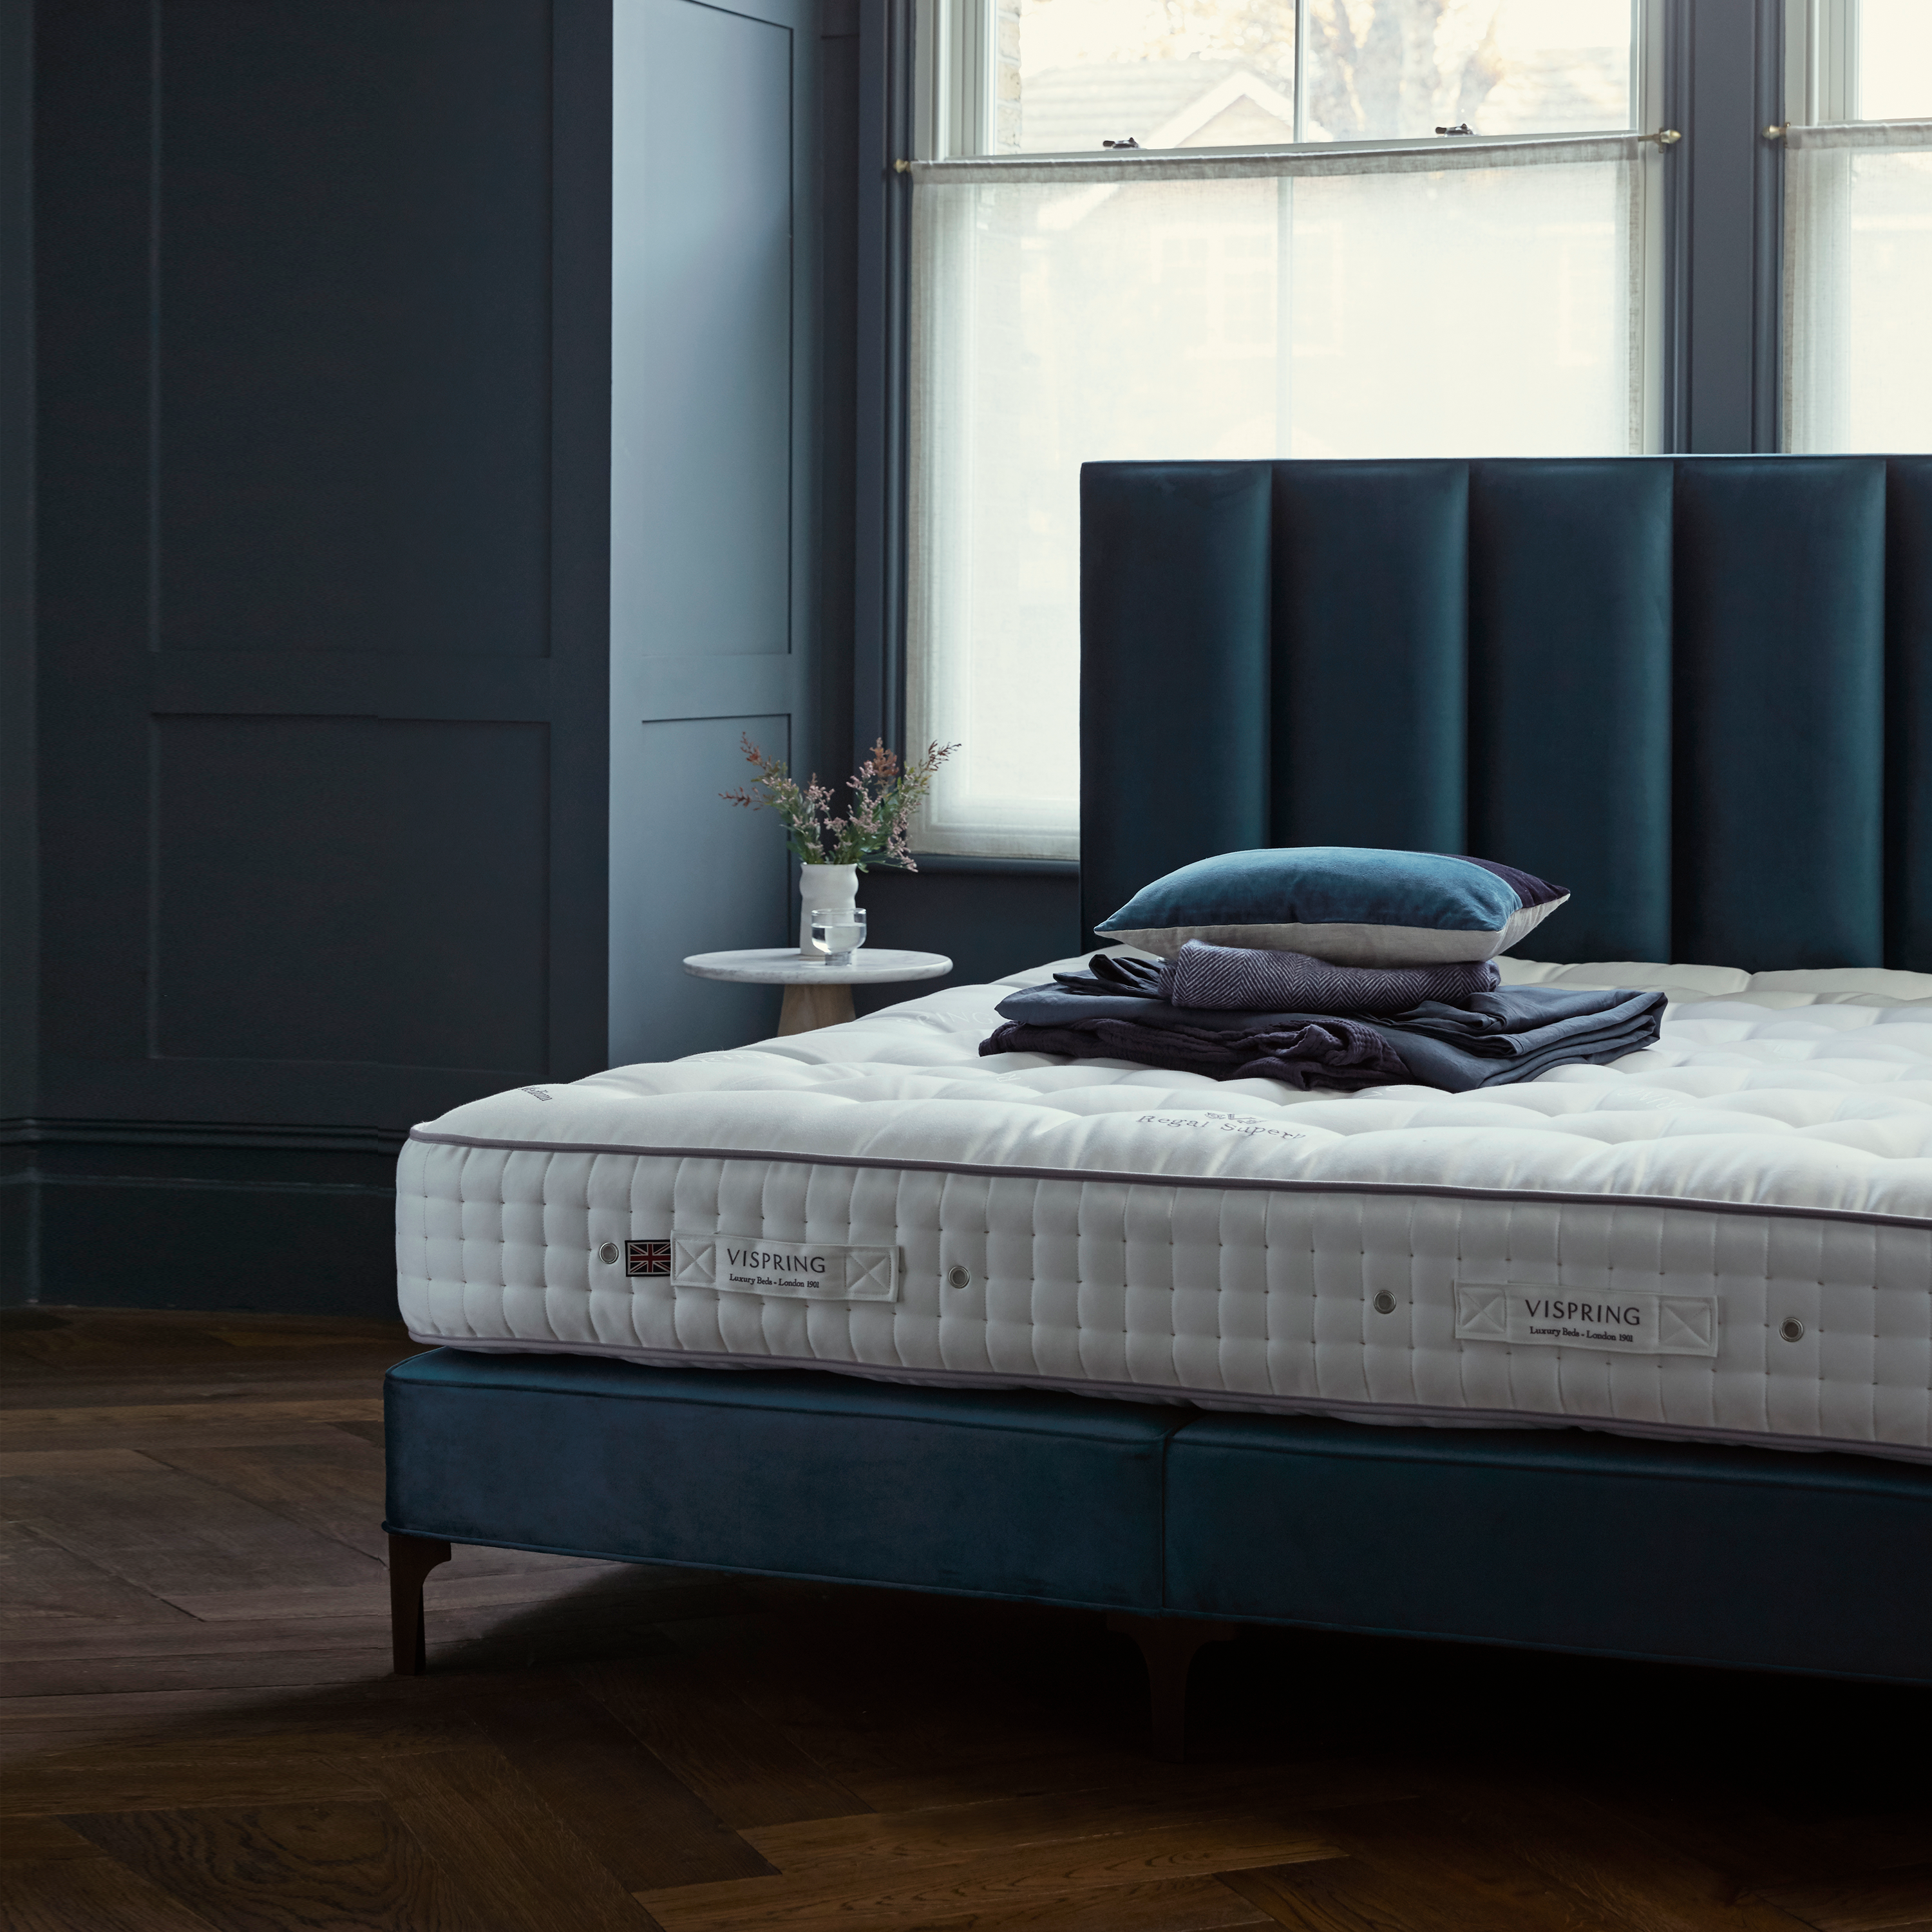 The Regal (aka Fitzrovia) has 2,200 coils hand-nested into a single layer. Combined with layers of British fleece wool, Shetland wool, and hand-teased horsehair, this mattress gives you an exceptional and healthful night's sleep that is a bit flatter and firmer than its double-decker counterpart, the Tiara.